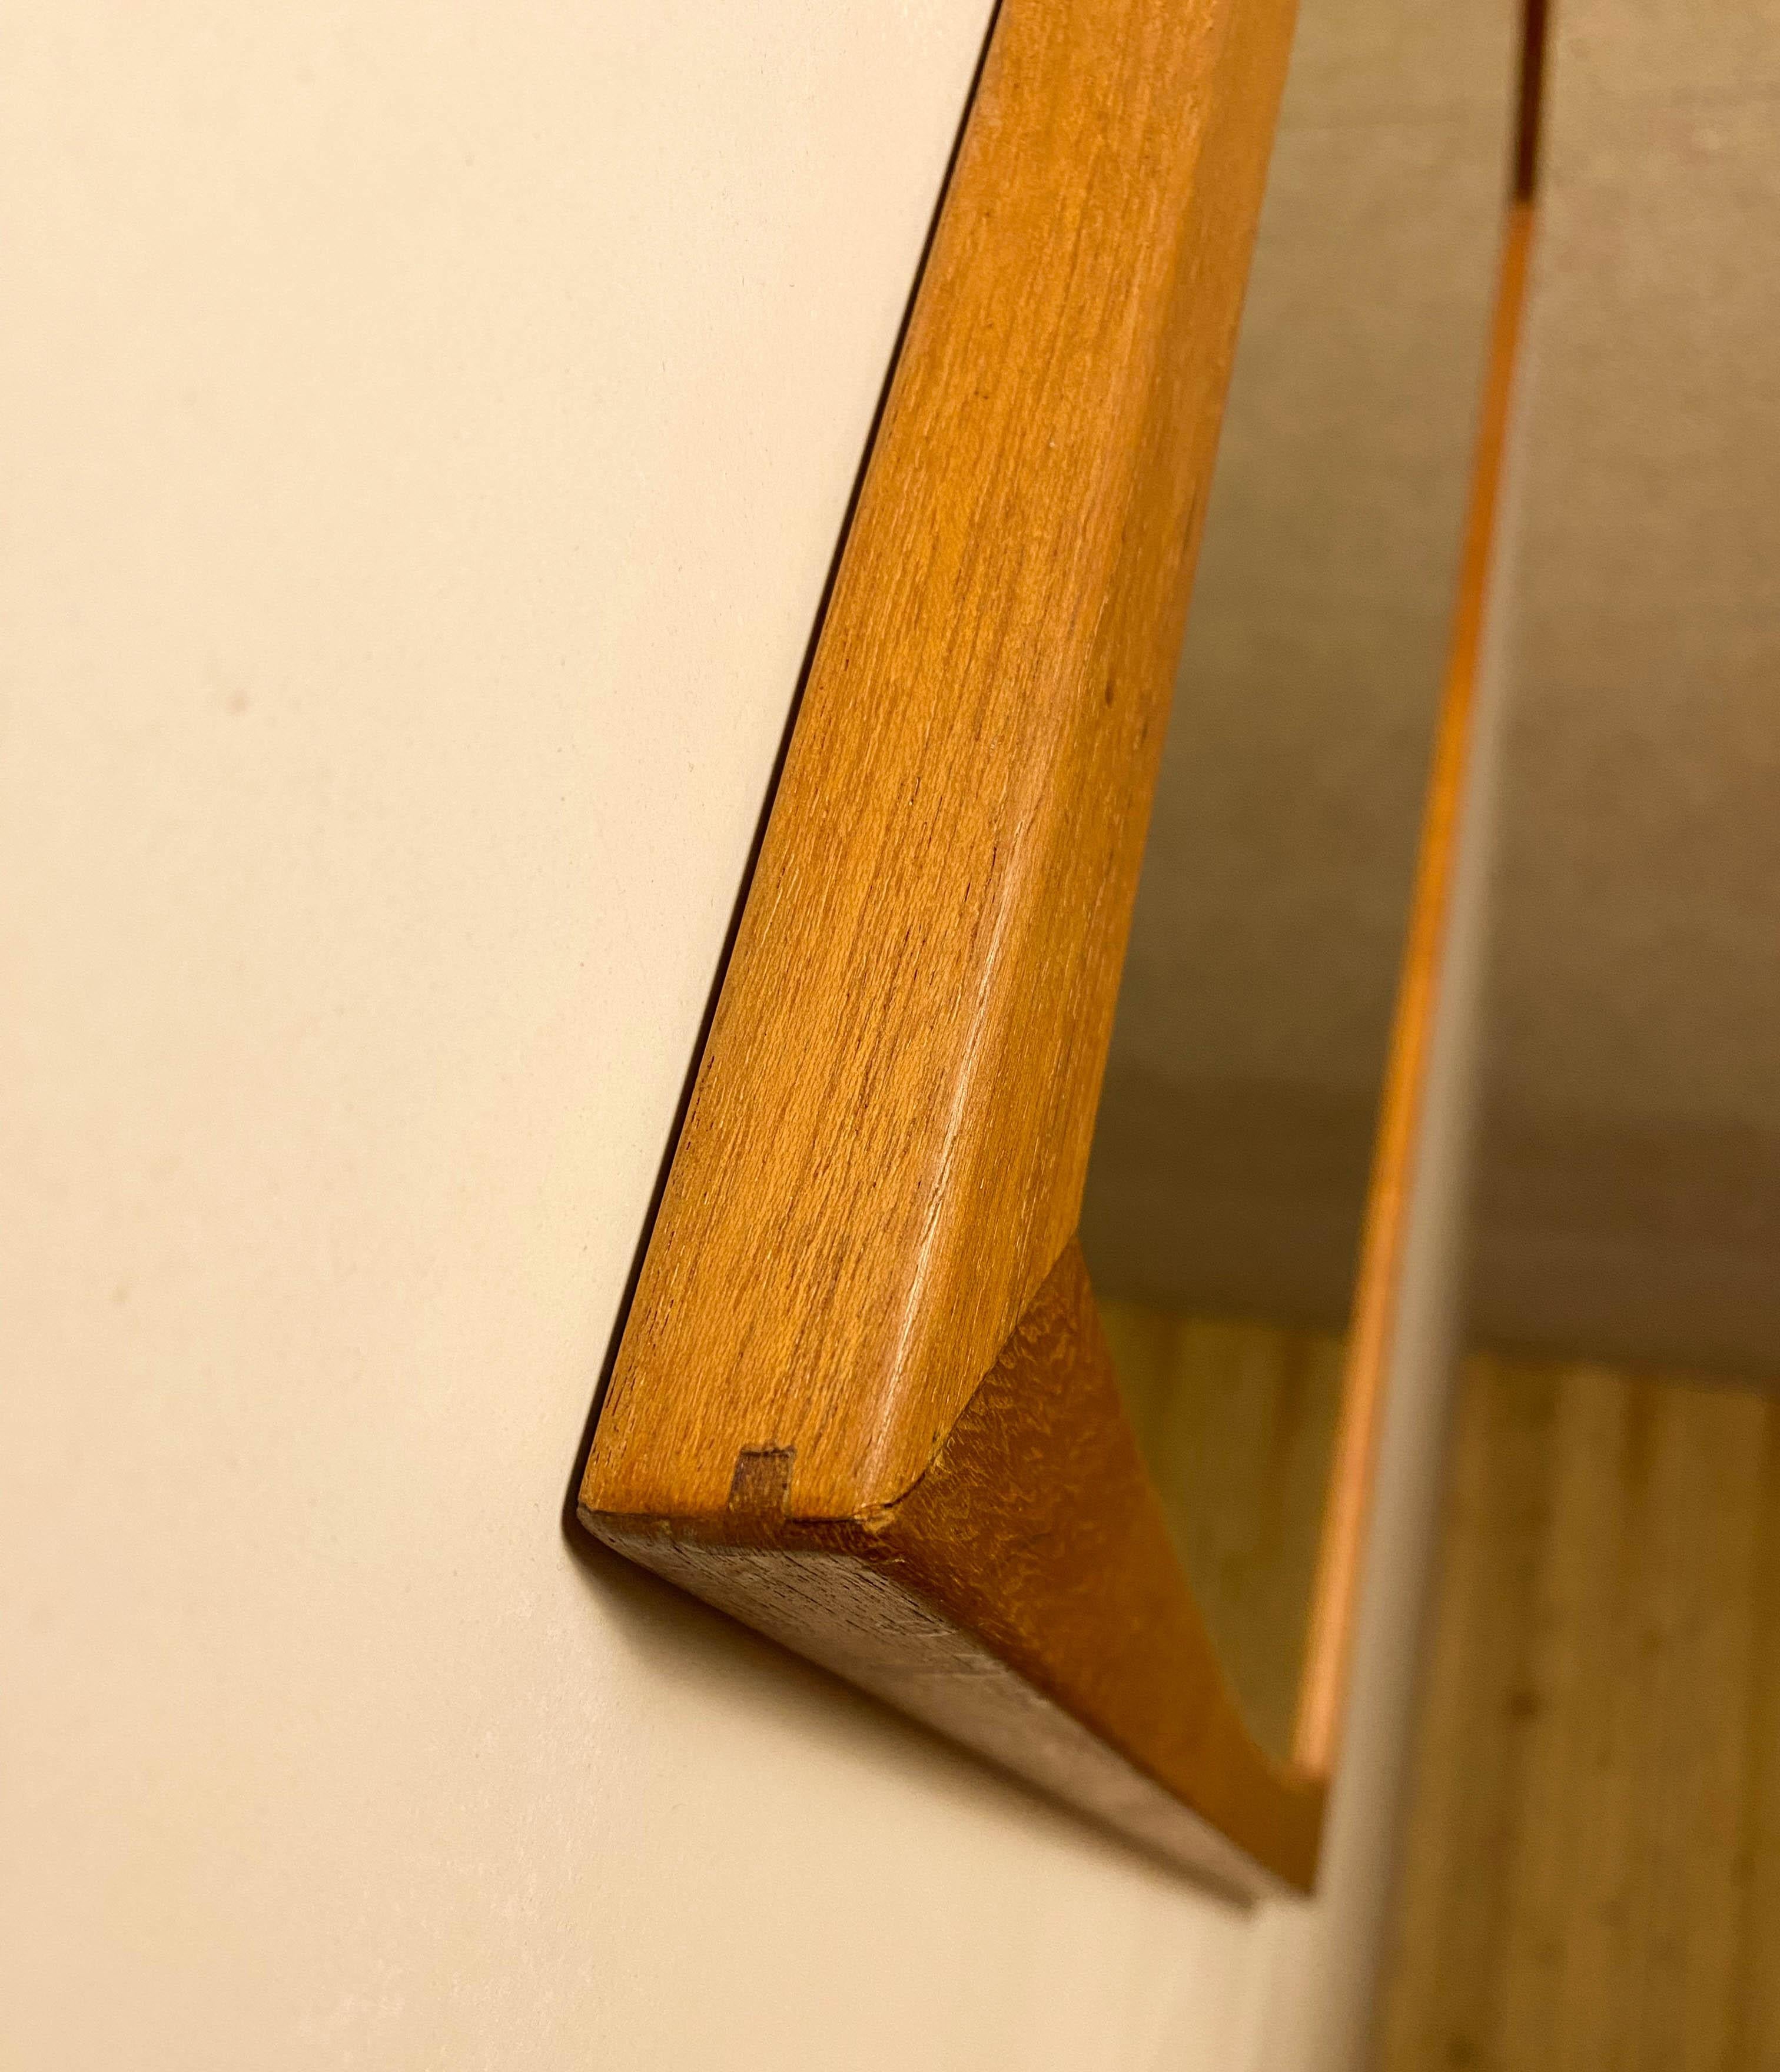 Wall mirror by Aksel Kjesrsgaard with shelf and drawers.
The mirror has got a signature mark Aksel Kjesrsgaard , the shelf and drawers dont have any mark.